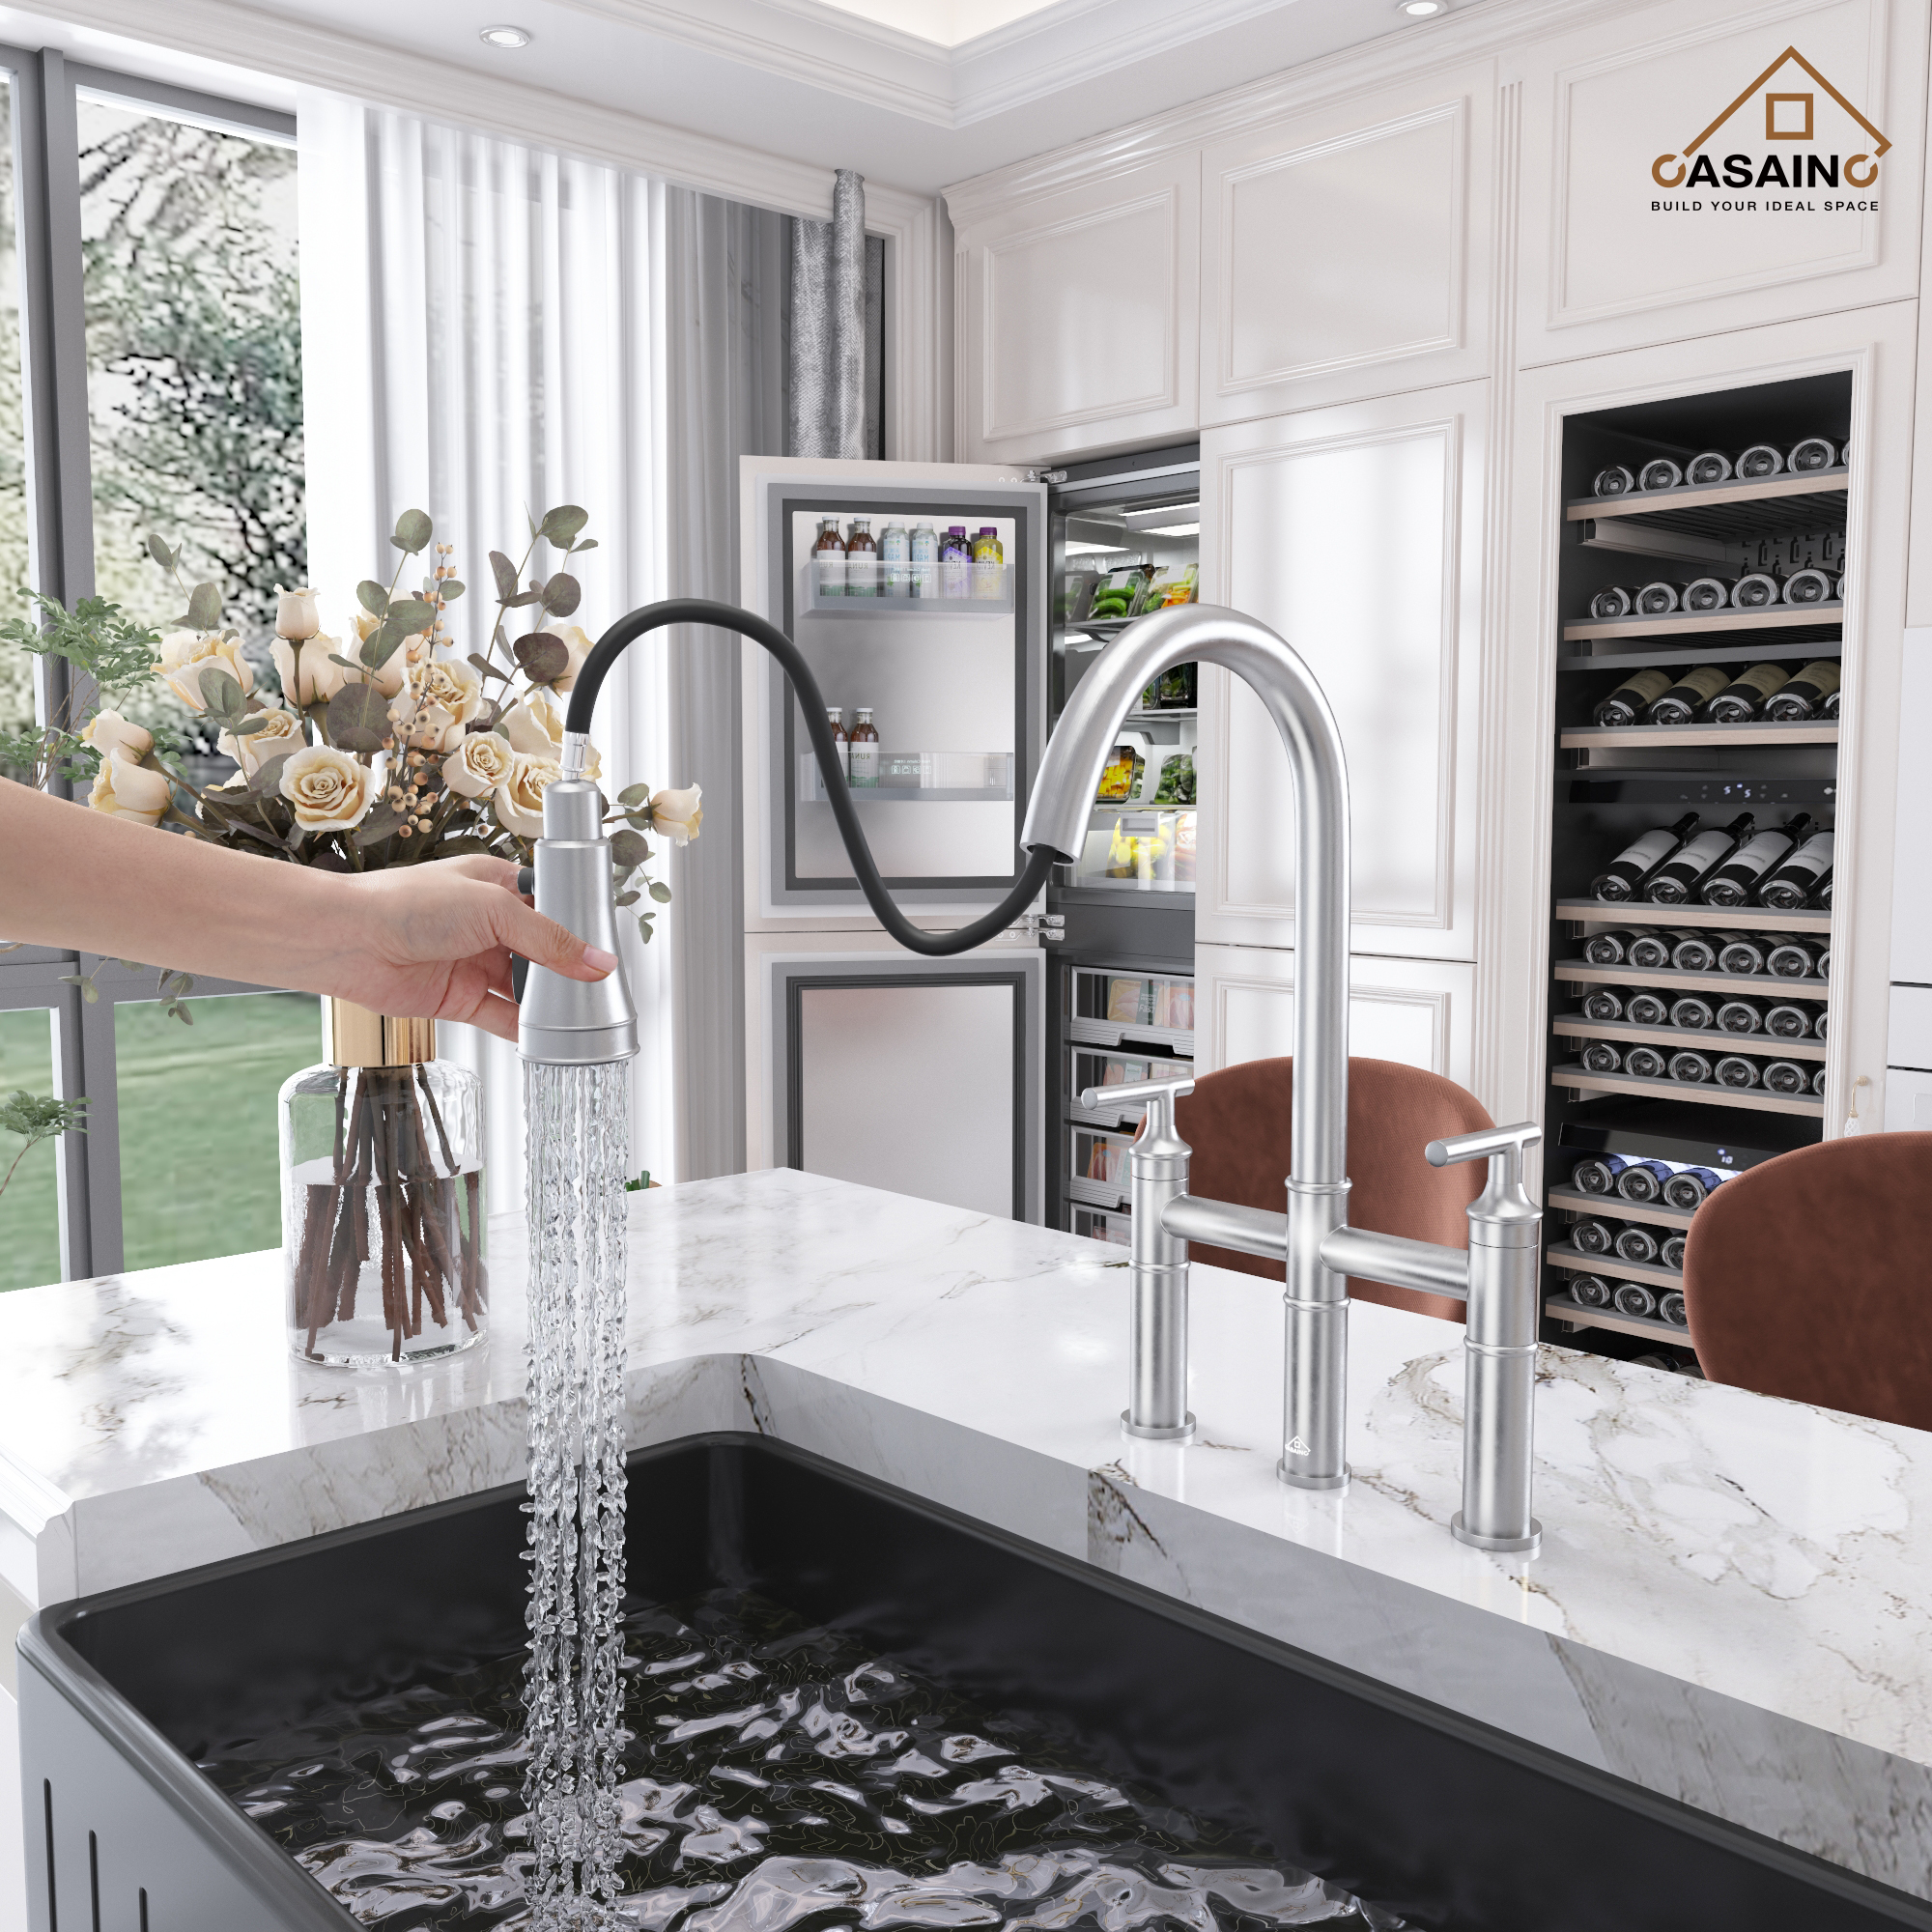 CASAINC Black Single Handle Pull-Down Kitchen Faucet with Sprayer Function